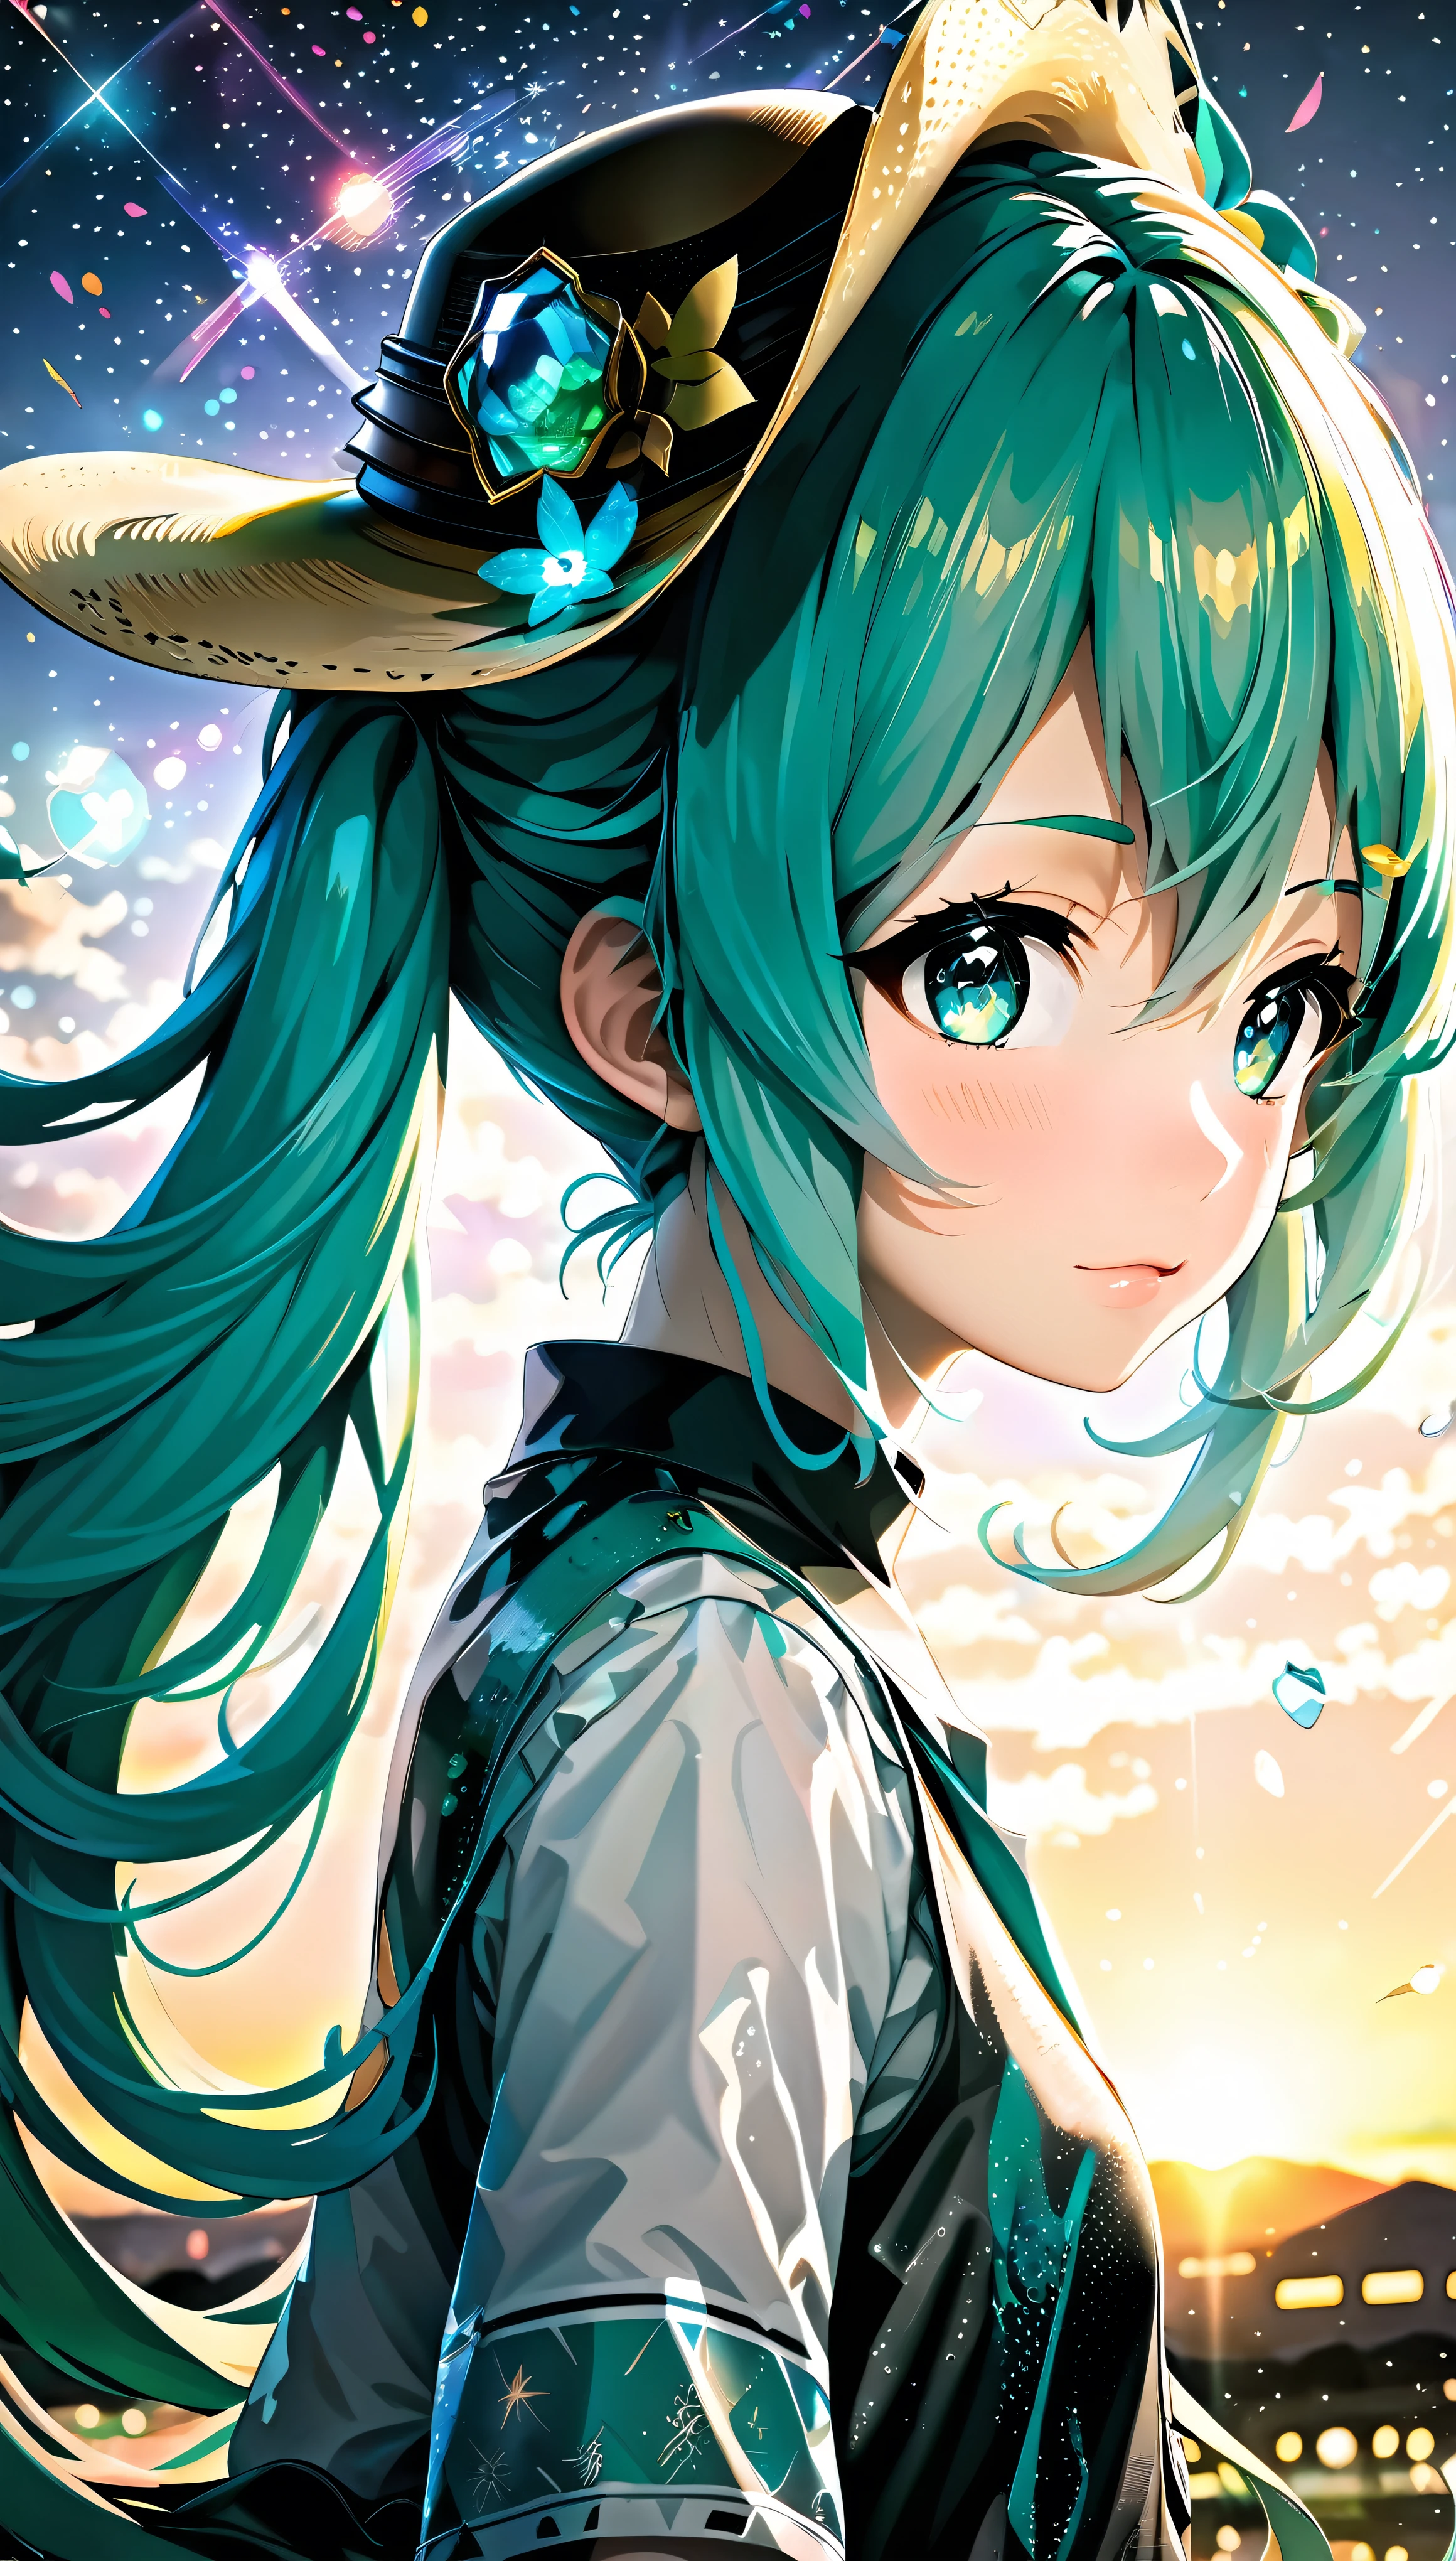 with high definition images，(1girl who drew Hatsune Miku、Ultra-detailed、A cowboy hat to accentuate big eyes、Intricately designed outfit with sequins and holographic effects、Detailed facial features with playful expressions、Artful digital art touch-up、 BREAK、Cowboy Setting、Dusty Road、Sunset in the background、Lasso in hand、High-contrast lighting creates depth and texture、Hatsune Miku&#39;s vibrant colors stand out against the earthy color scenes、 BREAK、Hatsune Miku&#39;s face close-up、Expressing determination and excitement、Freckles and pores are visible、Bring out the realism。